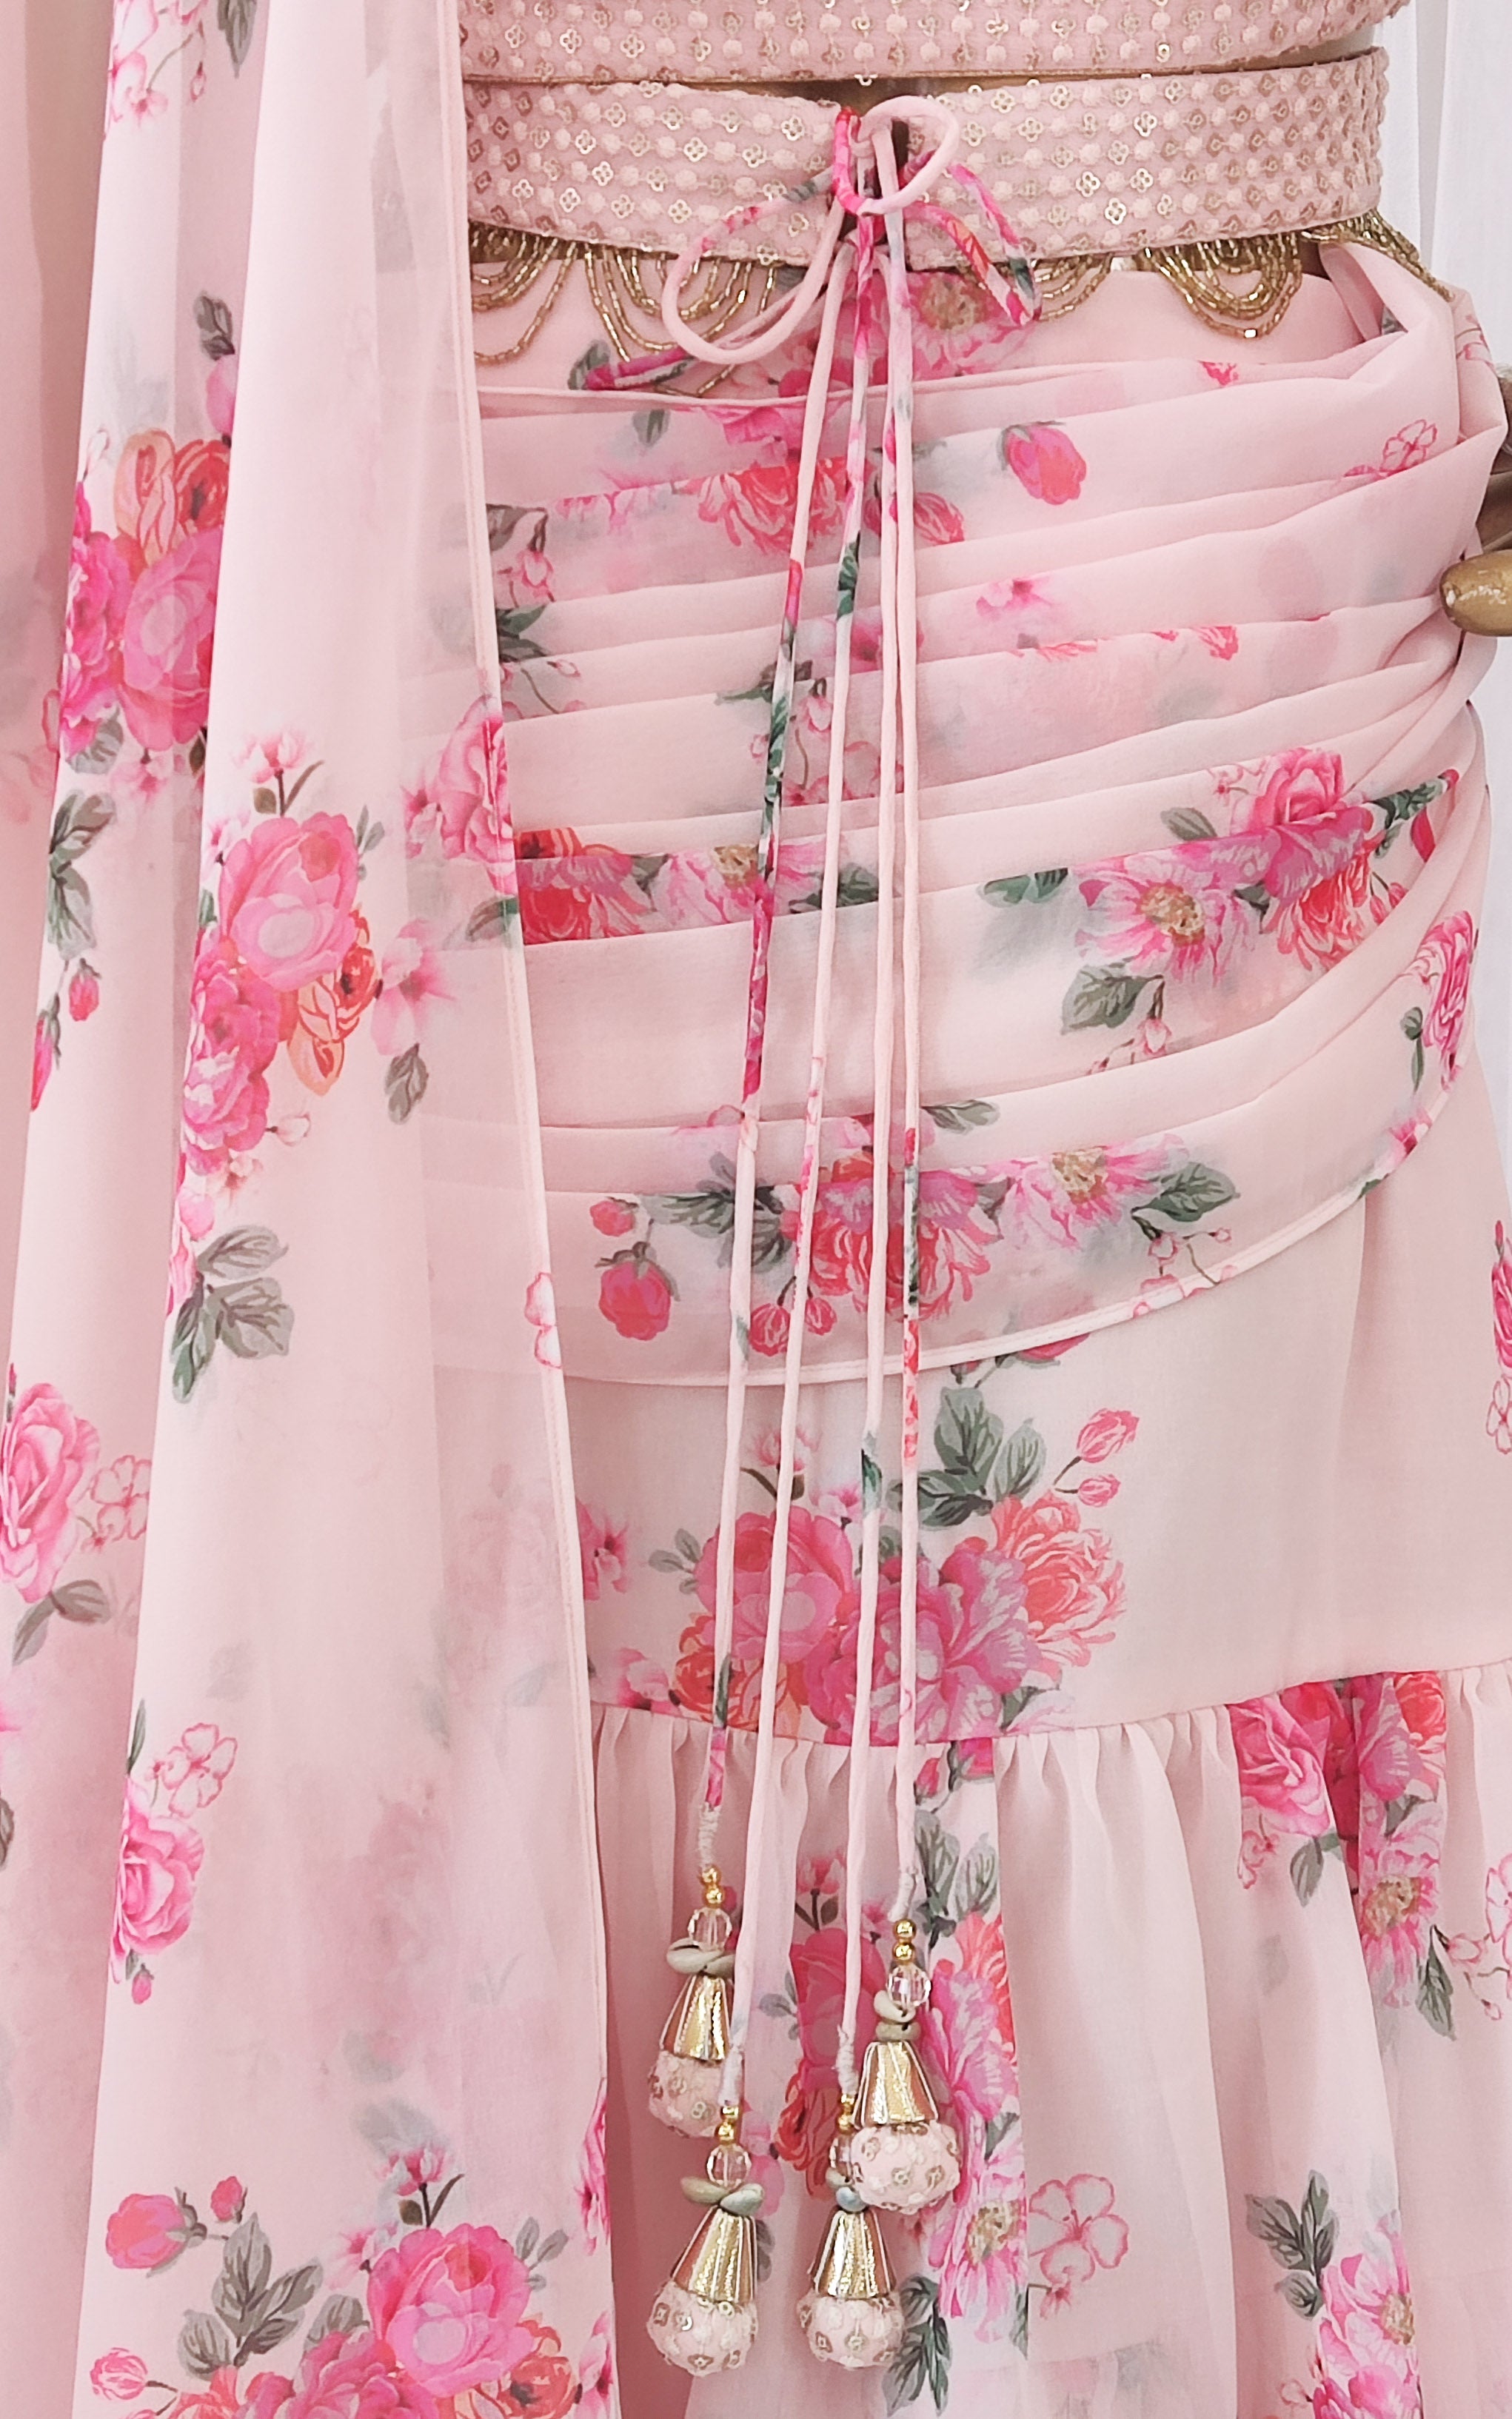 Millennial Pink Floral Pre-Stitched Ruffle Saree with Embellished Belt